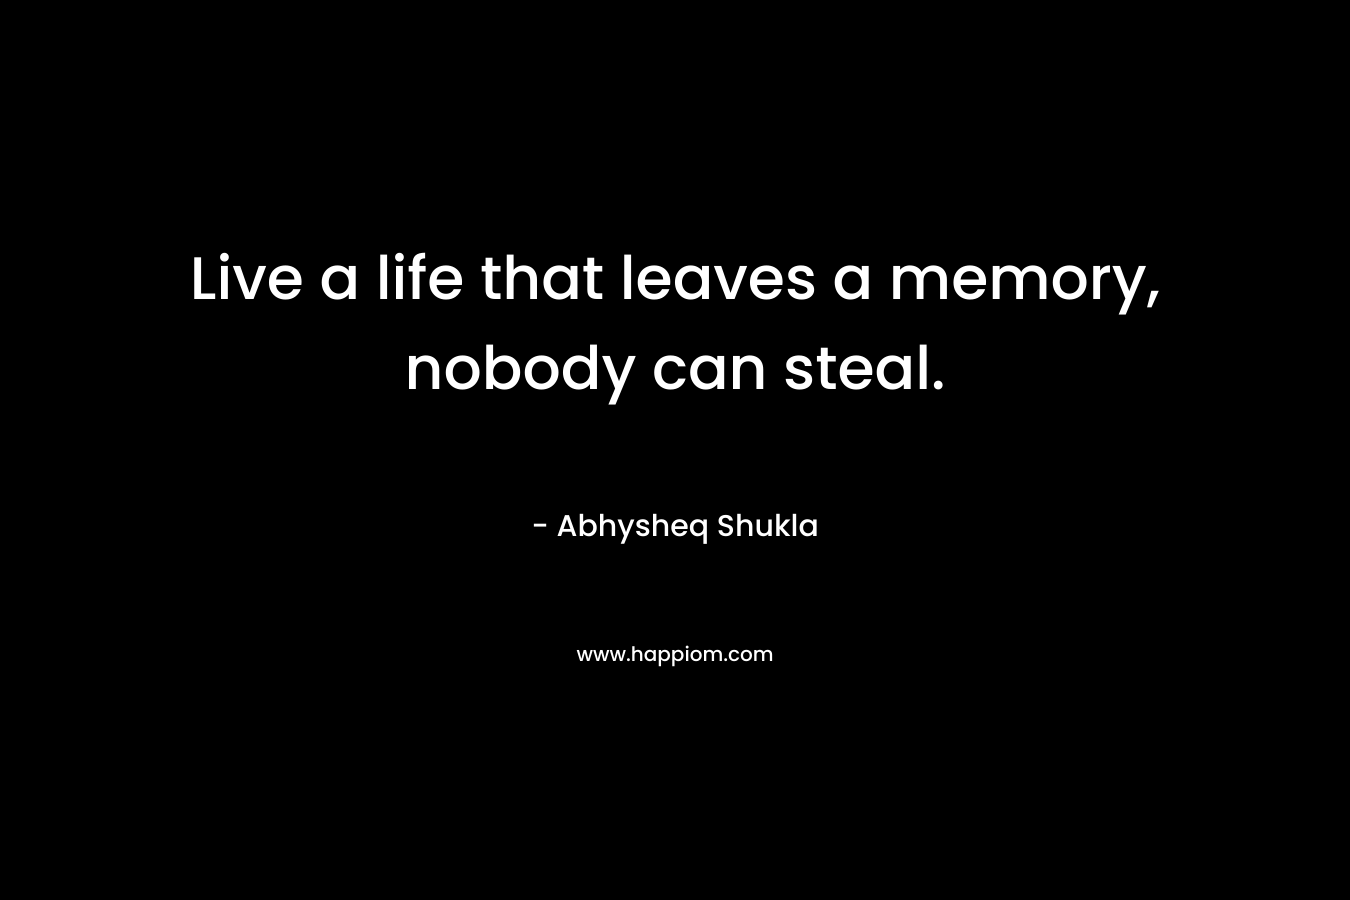 Live a life that leaves a memory, nobody can steal.